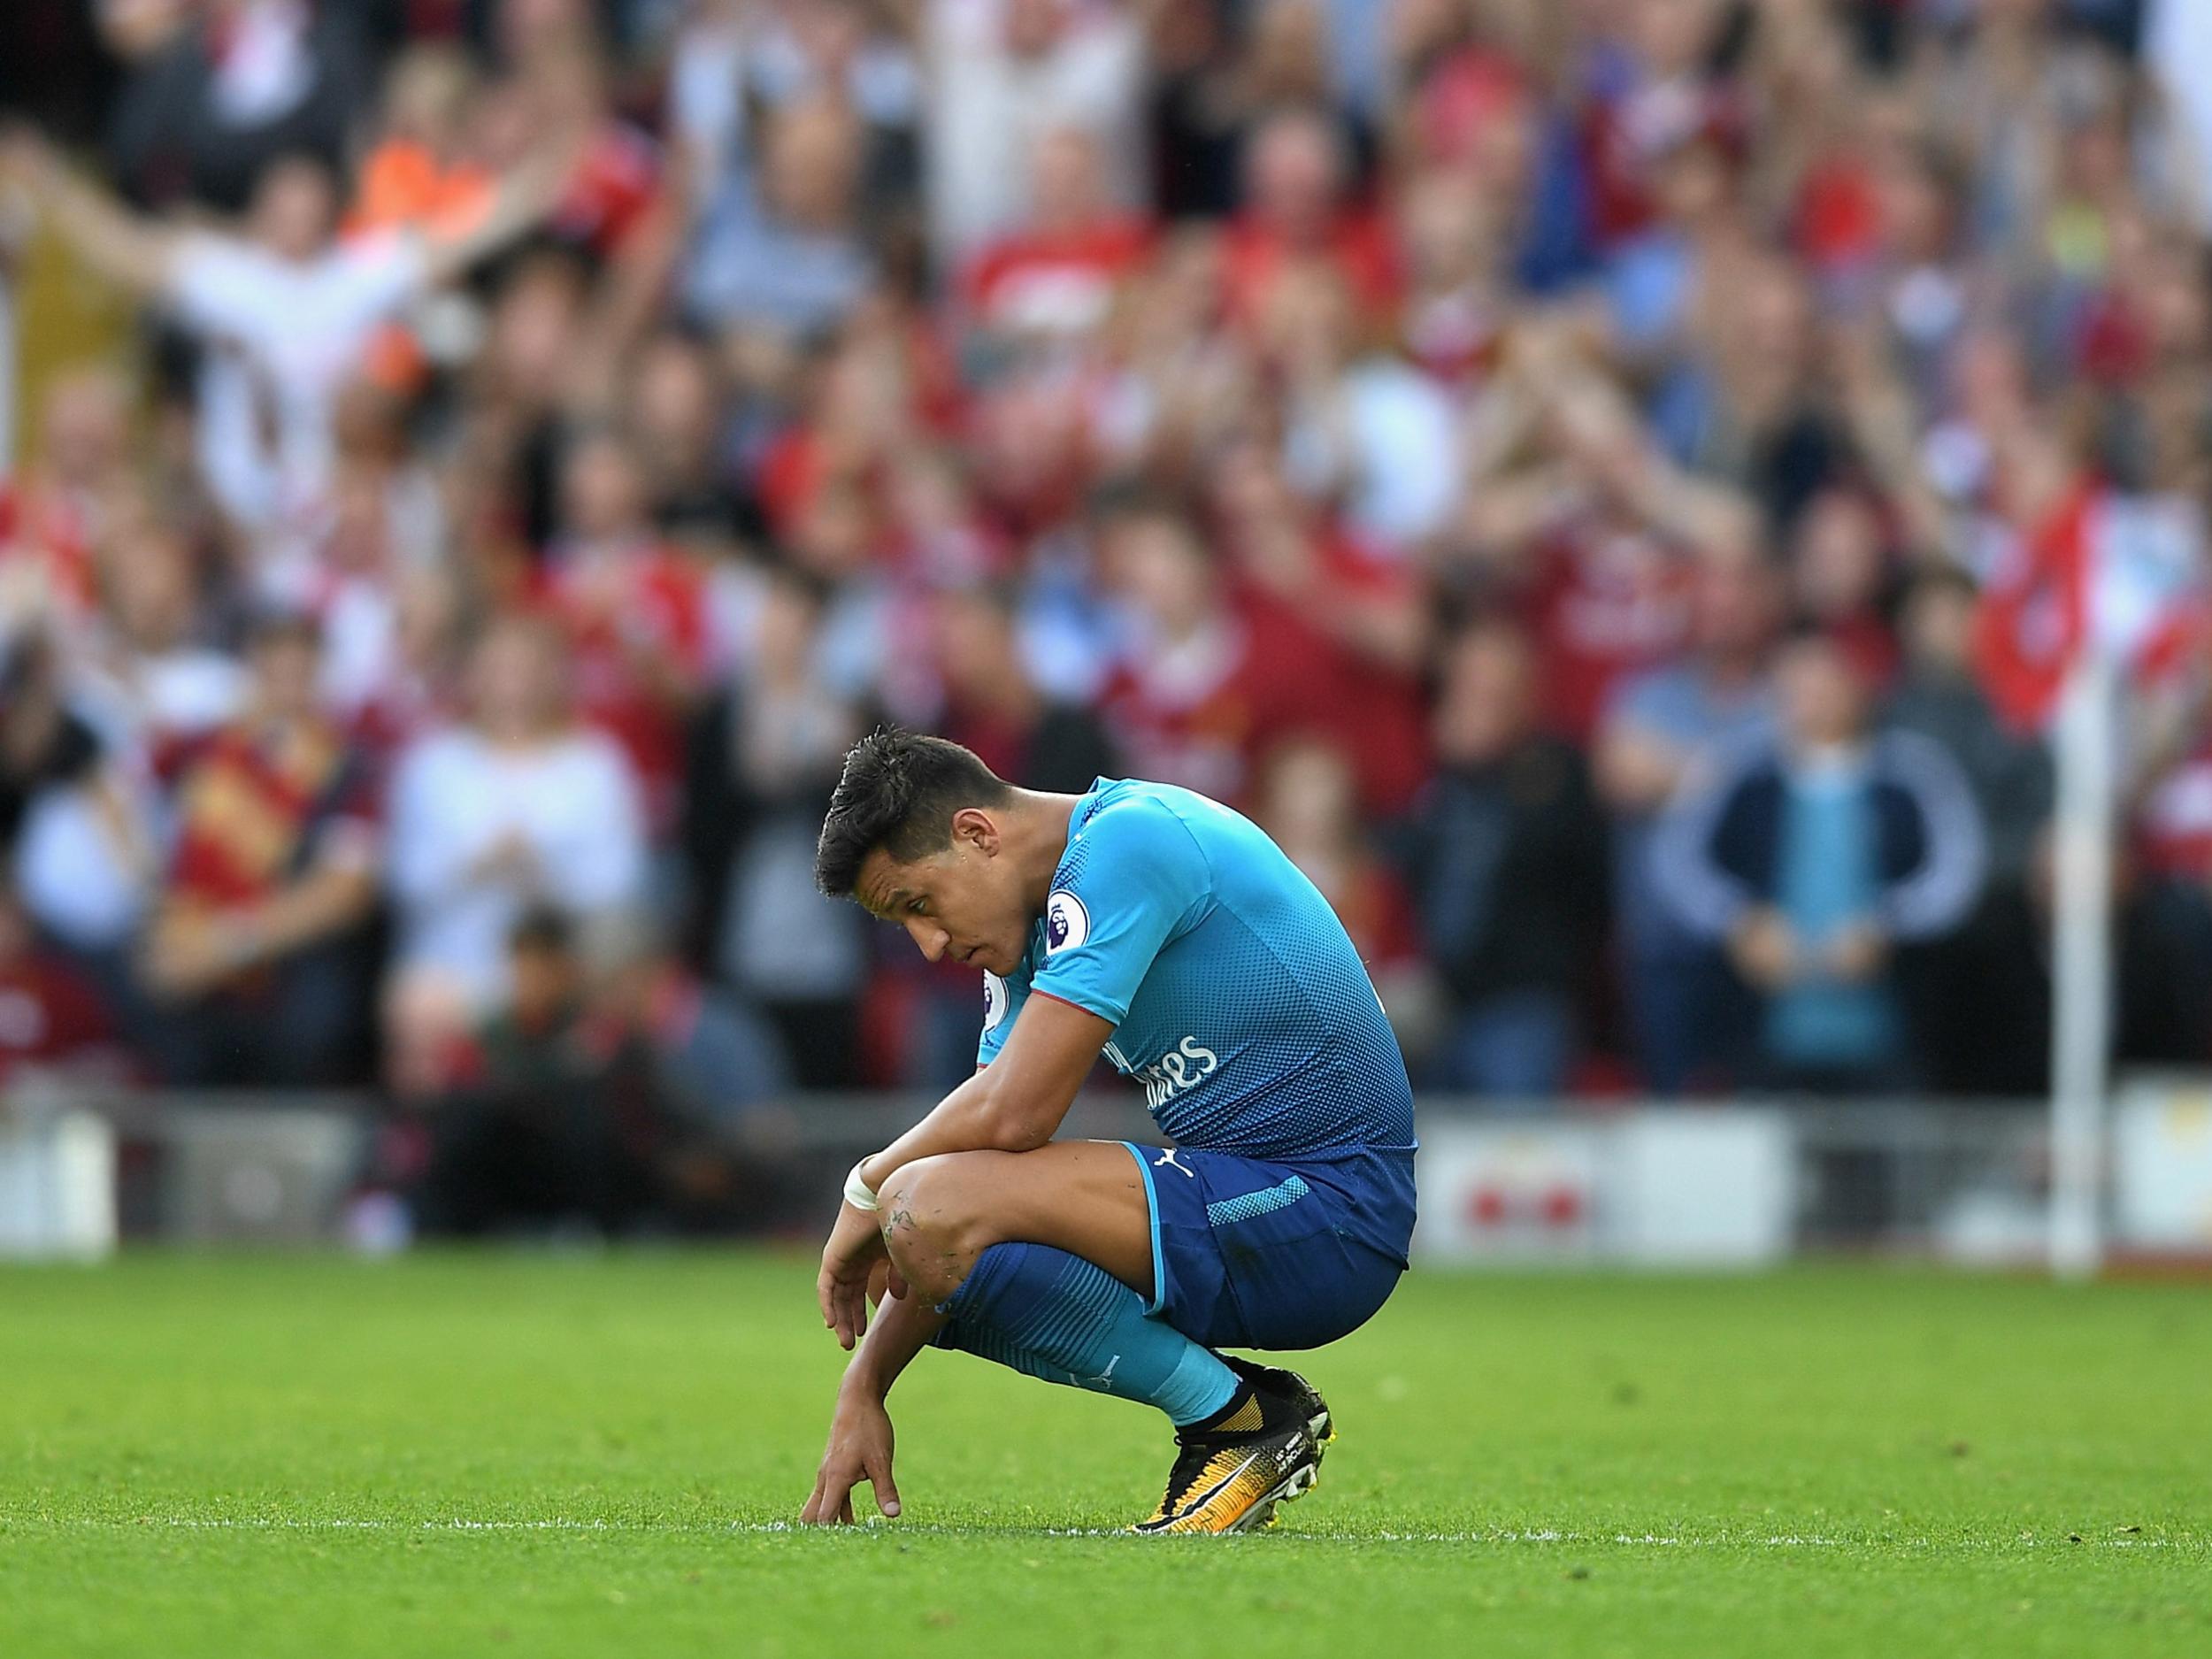 Arsenal were desperately poor as Liverpool ripped them apart